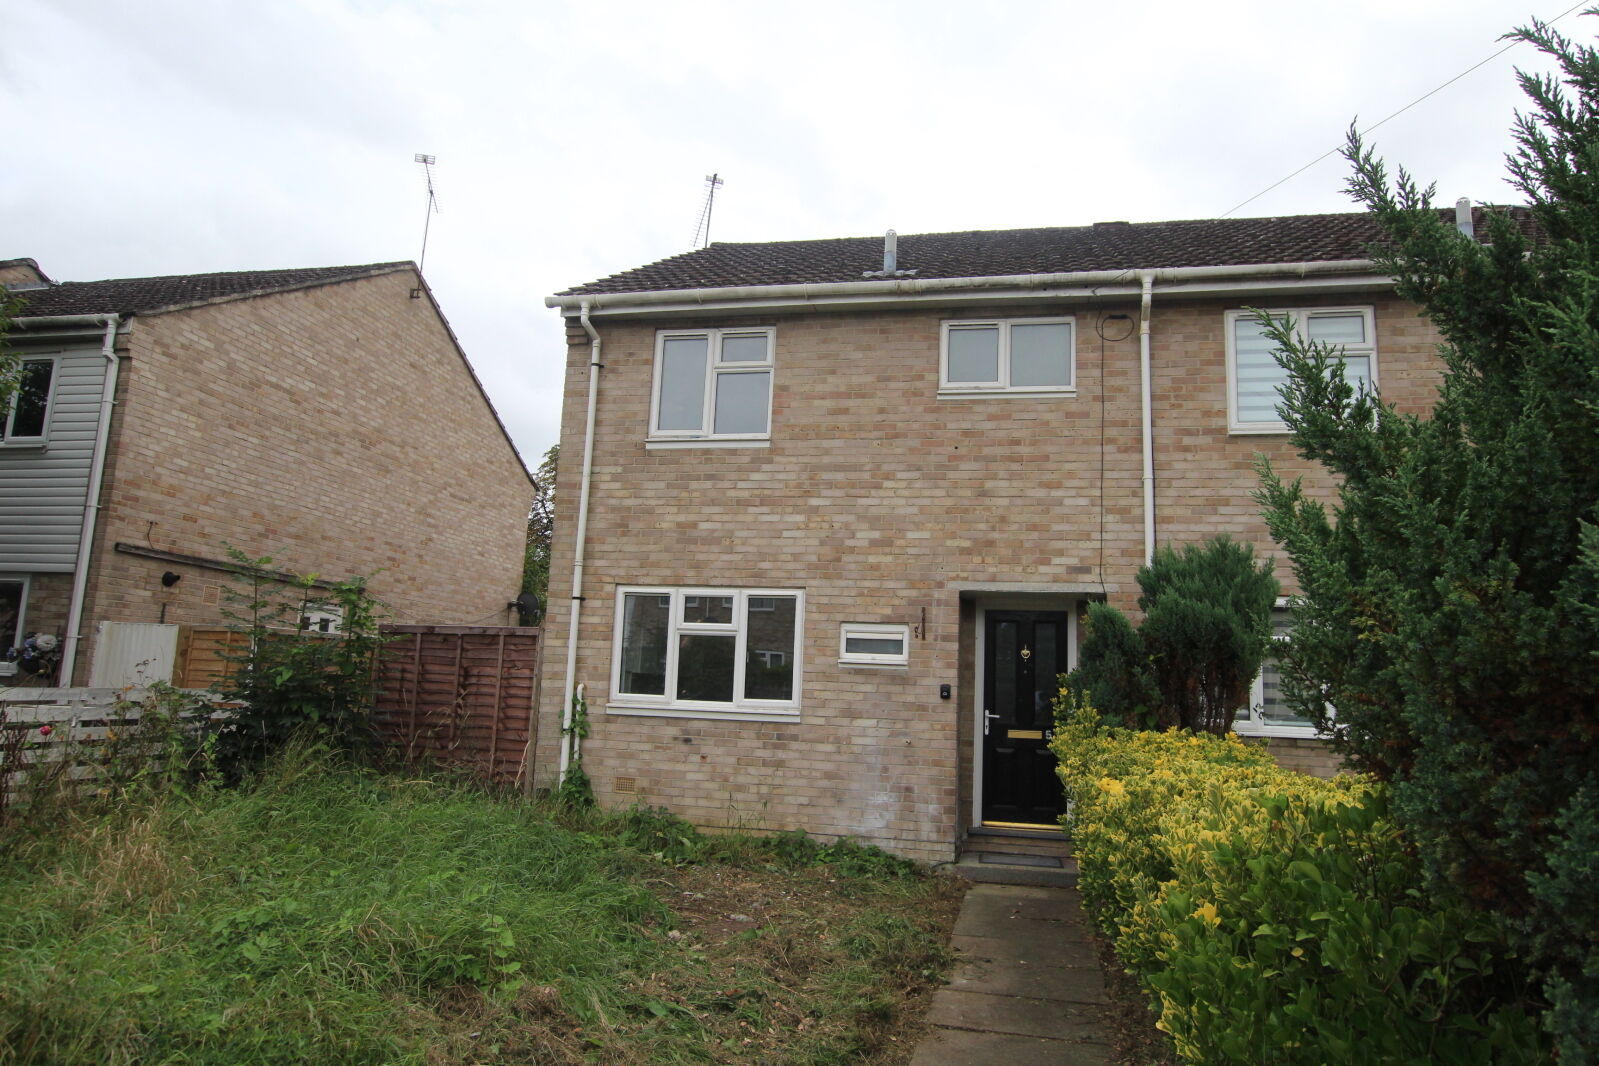 2 bedroom end terraced house for sale Chiltern View, Purley on Thames, RG8, main image